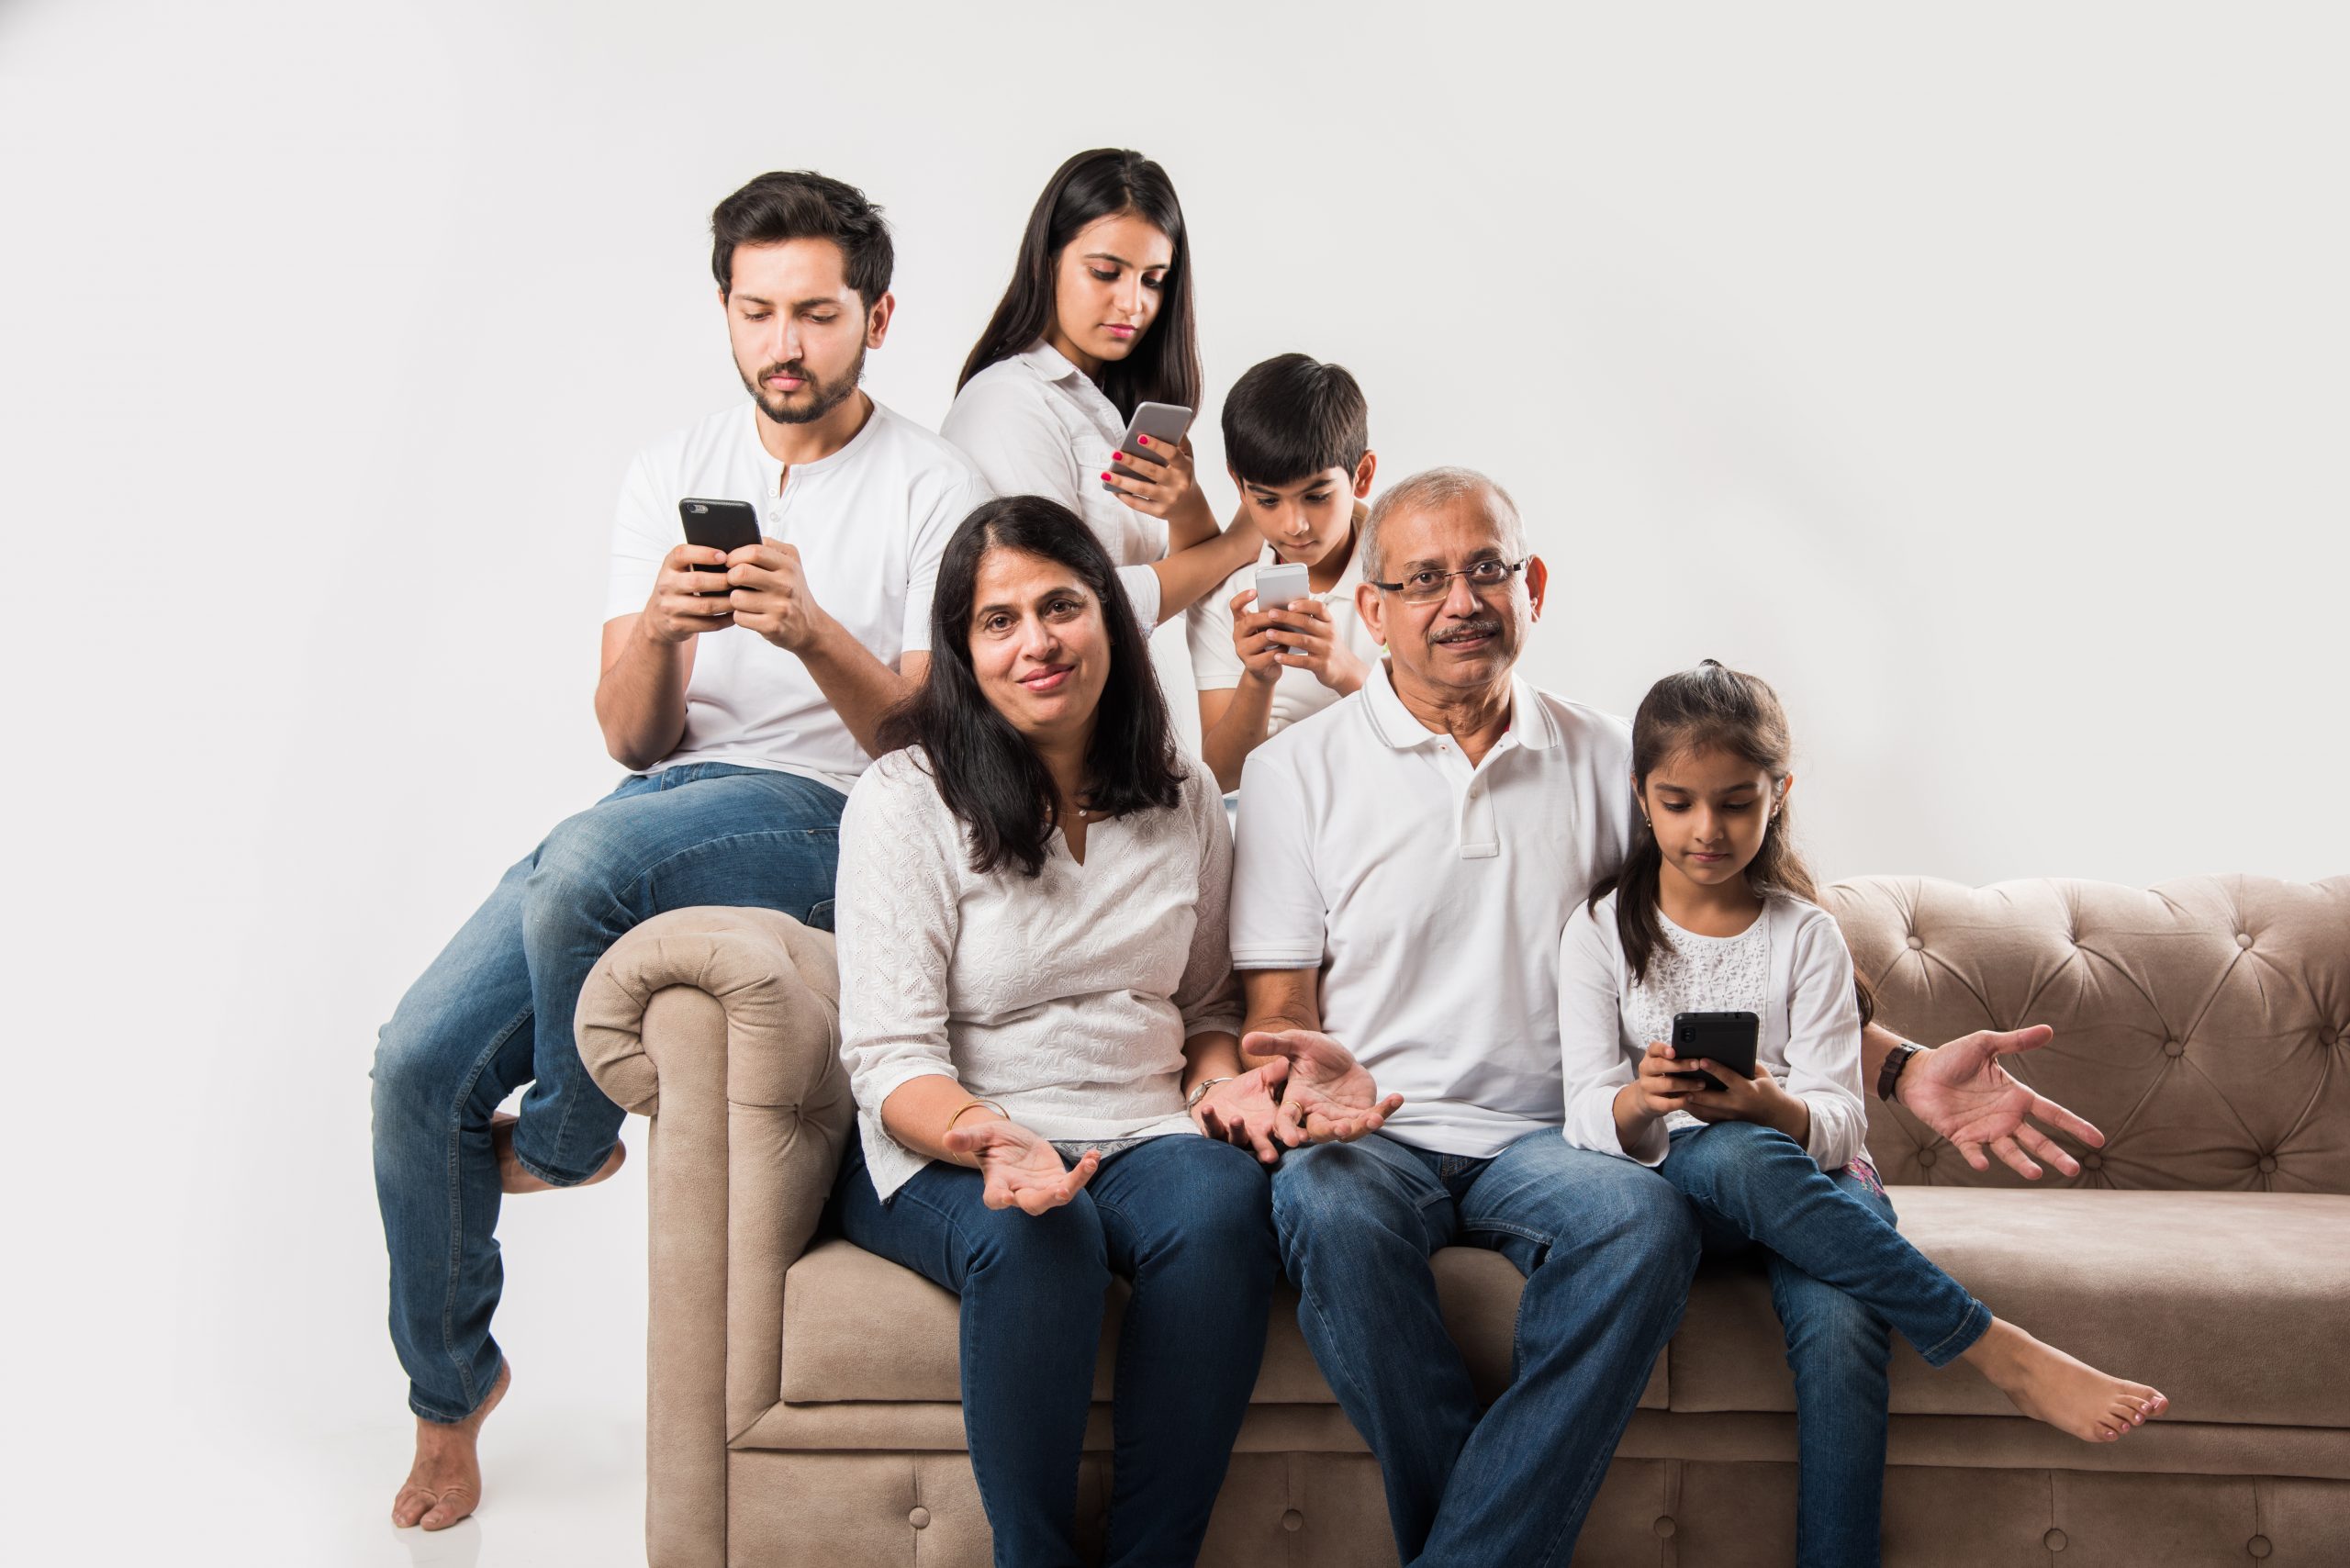 Photograph of adults who are likely parents, with two older and two younger children, with all children using mobile devices, arranged in a family portrait style